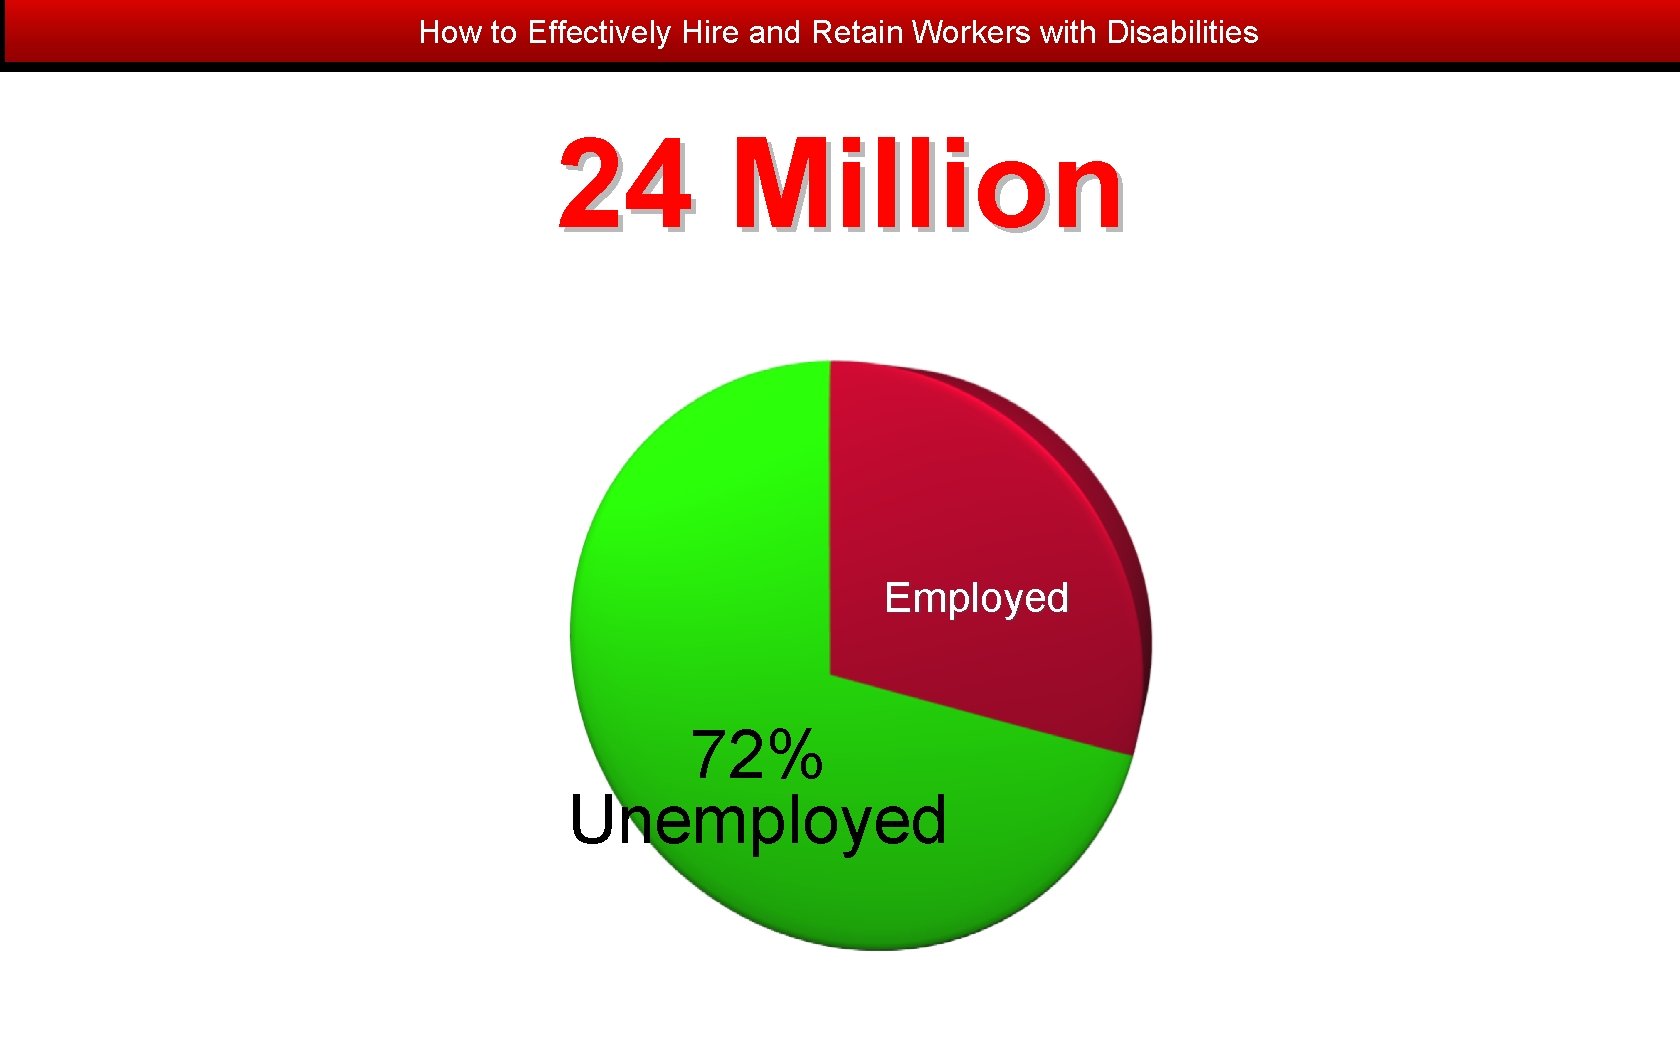 How to Effectively Hire and Retain Workers with Disabilities 24 Million Employed 72% Unemployed